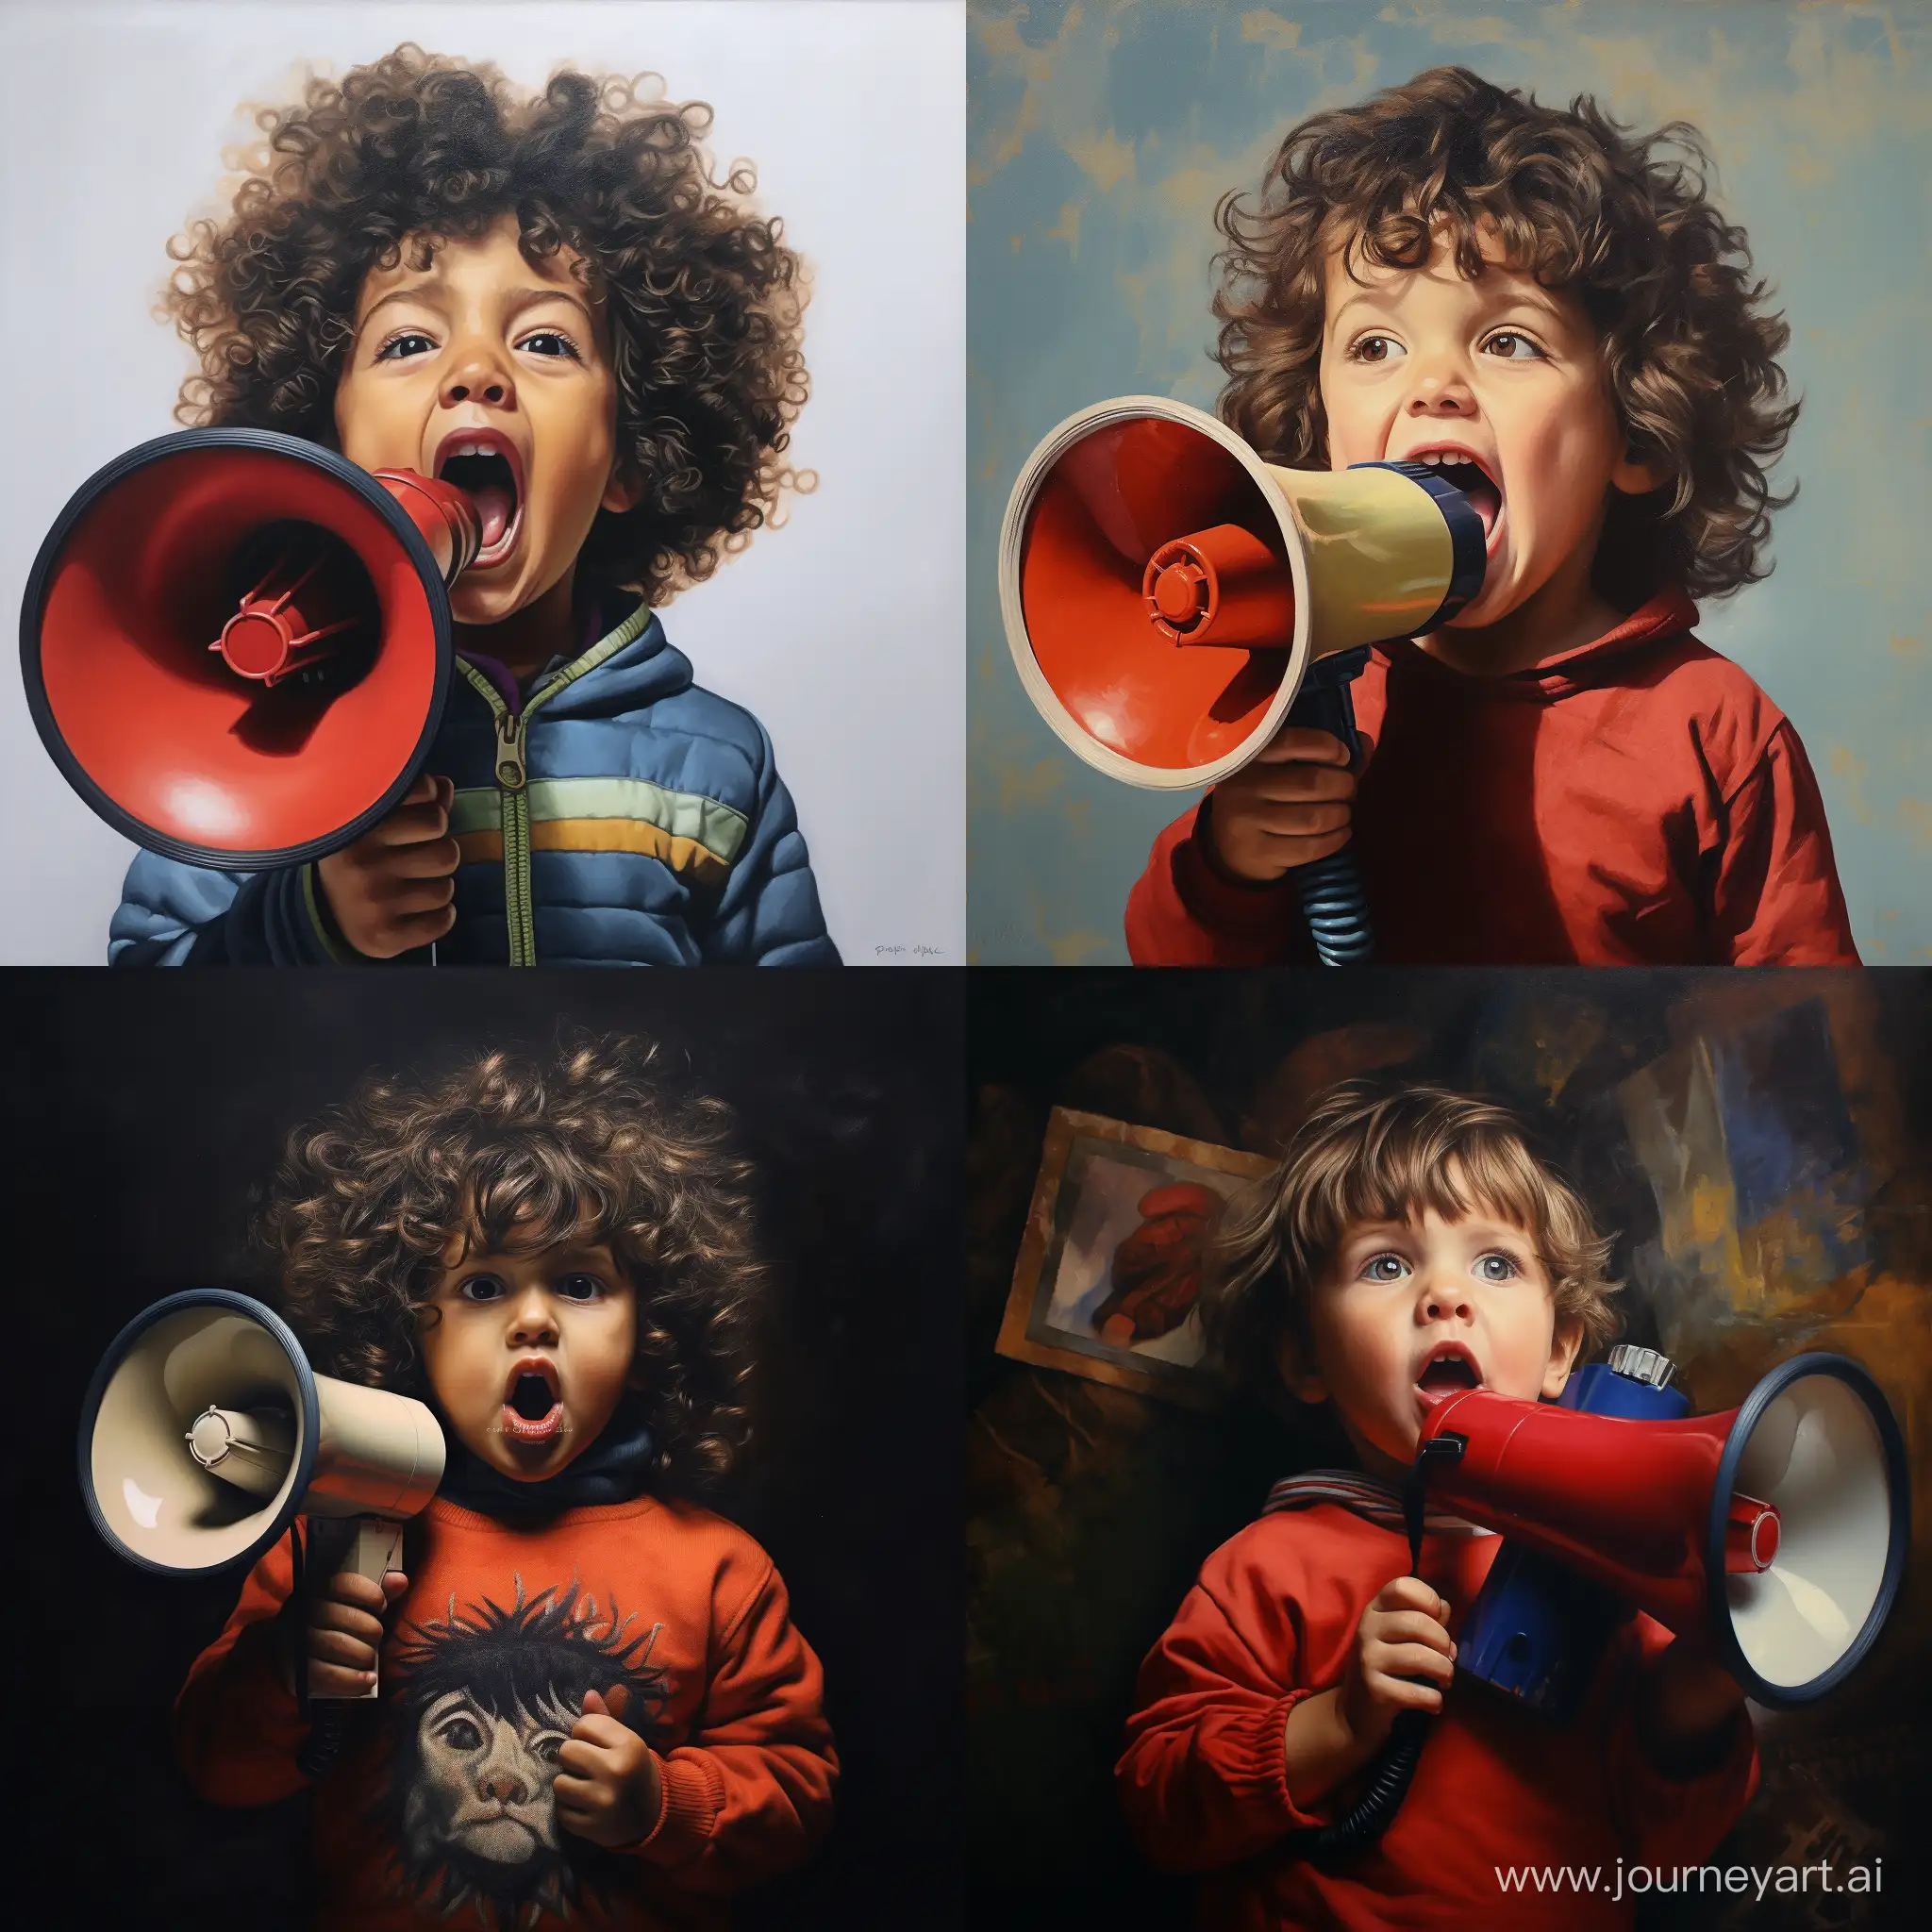 Enthusiastic-Child-with-Megaphone-in-Vibrant-Setting